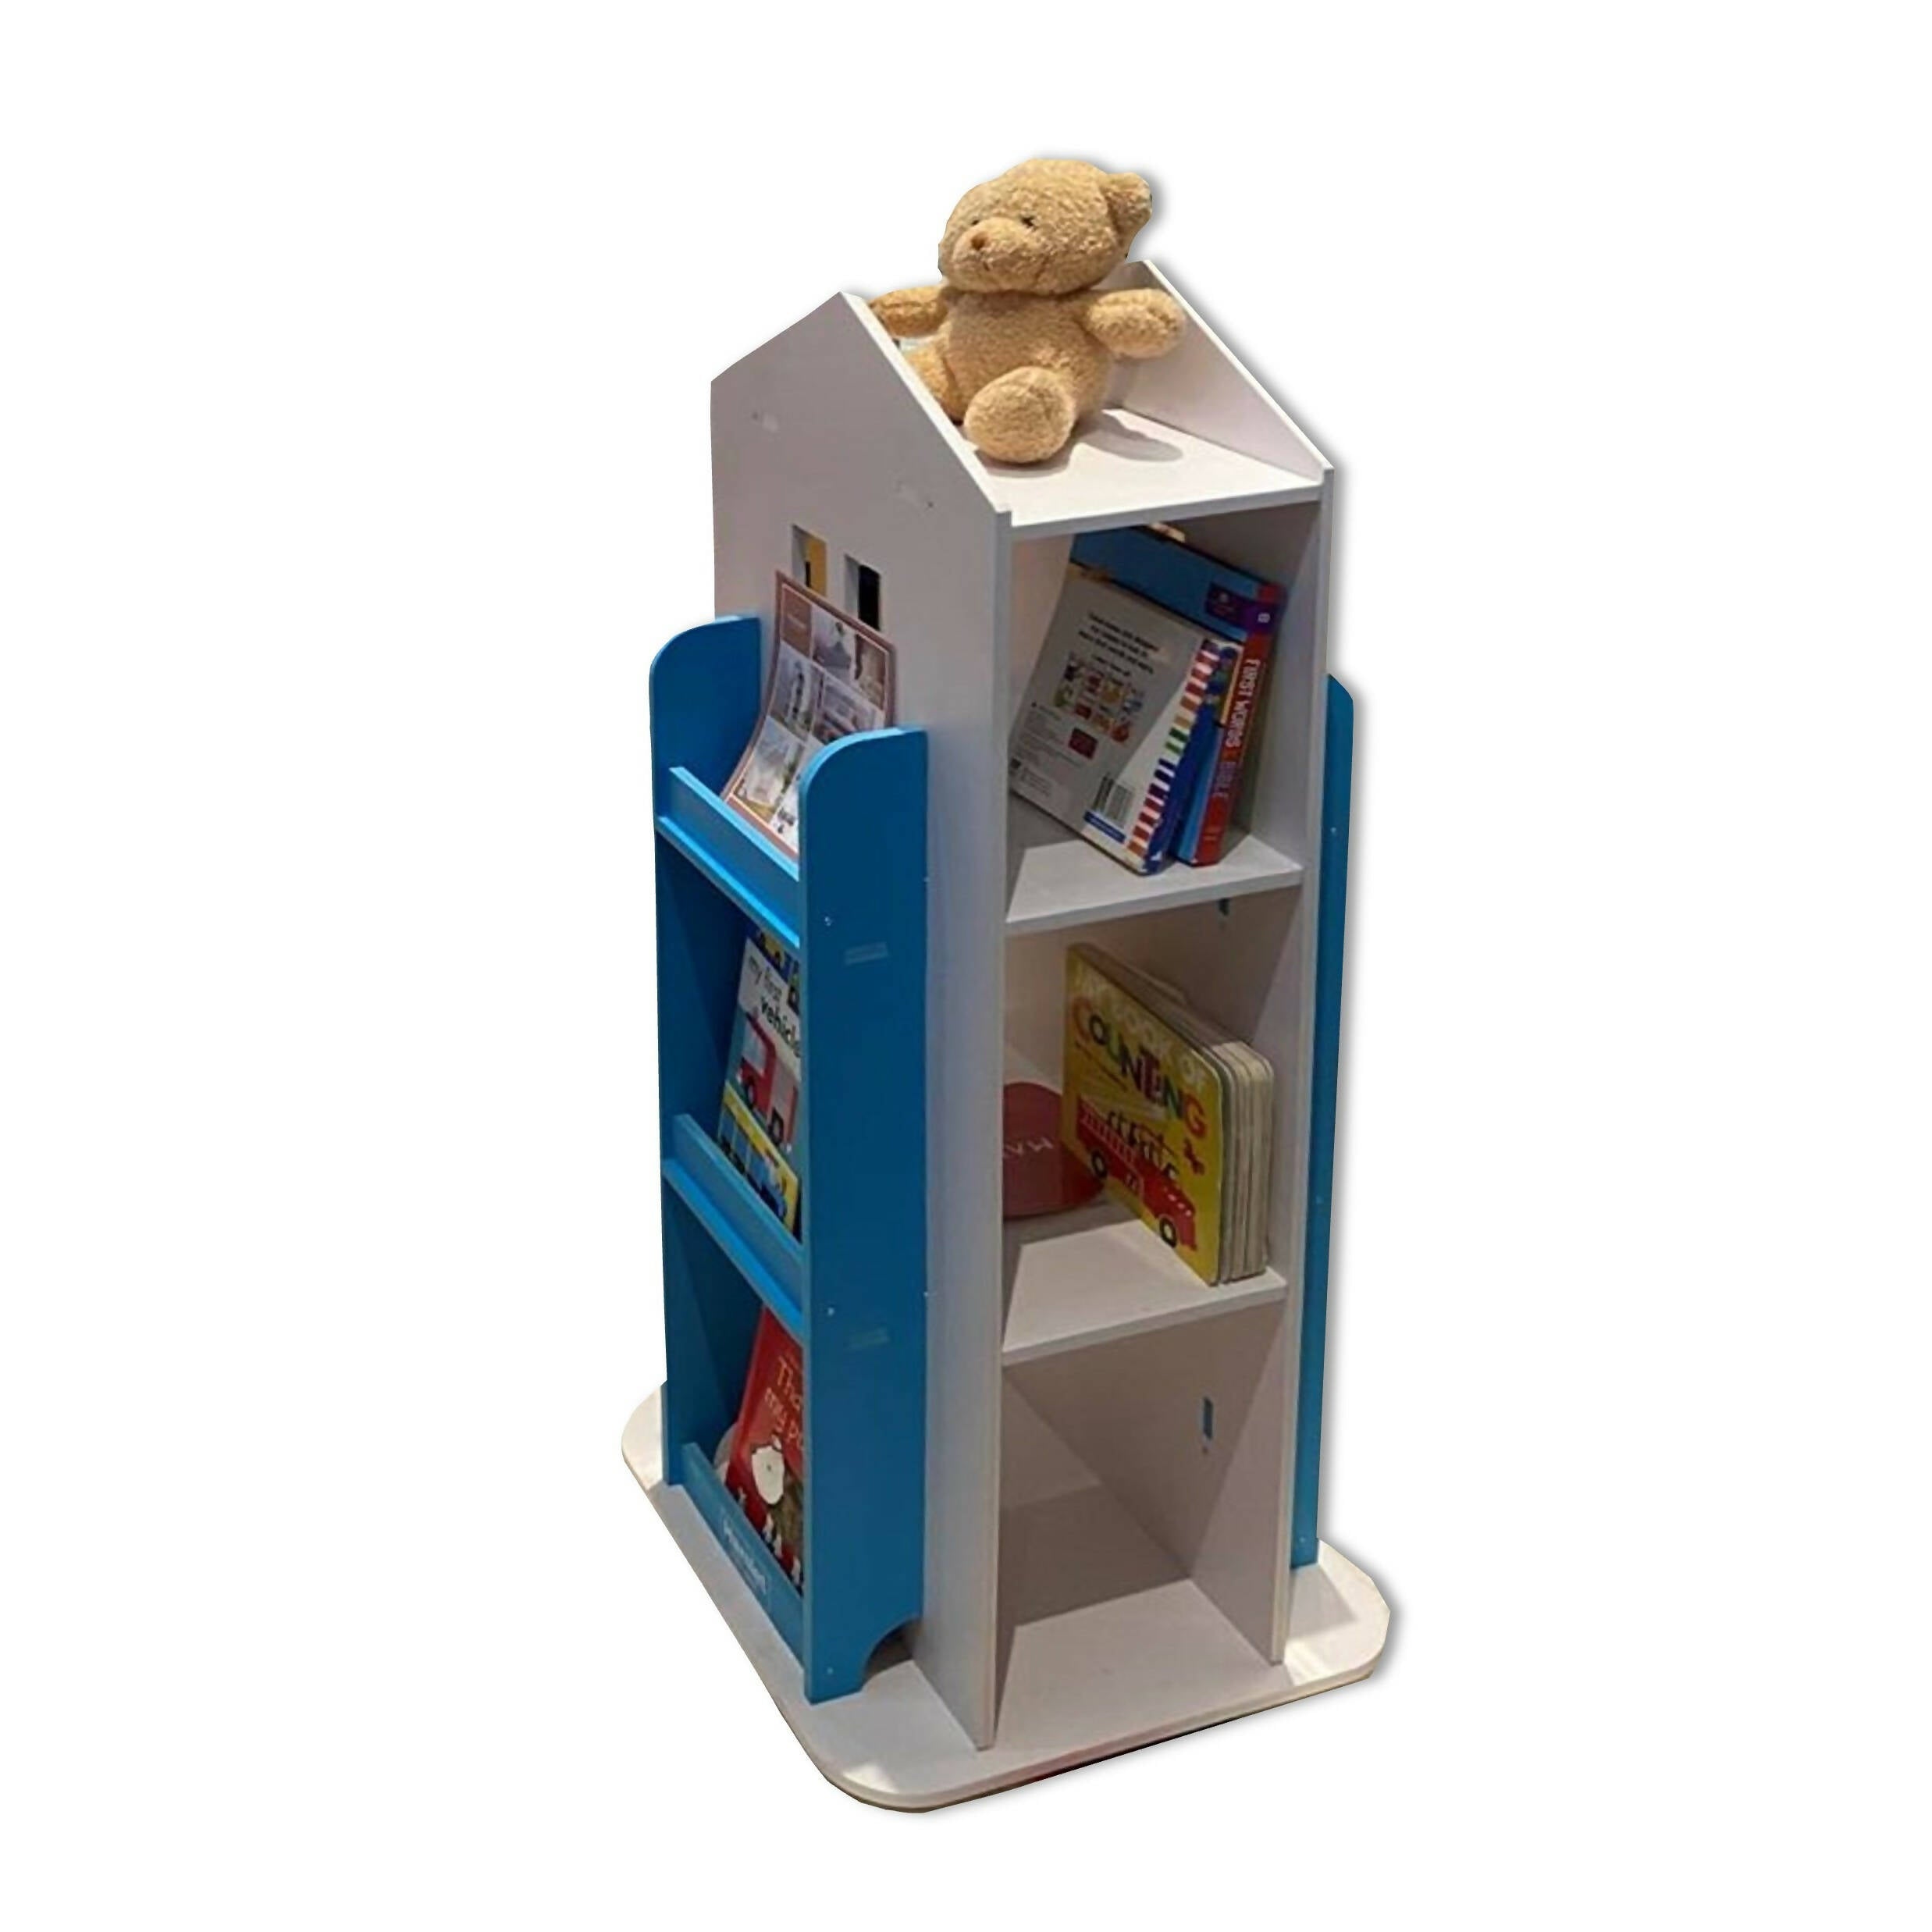 Lorwyn Kids Rotating Bookshelf by Hamlet Kids Room (White with Teal Accent)